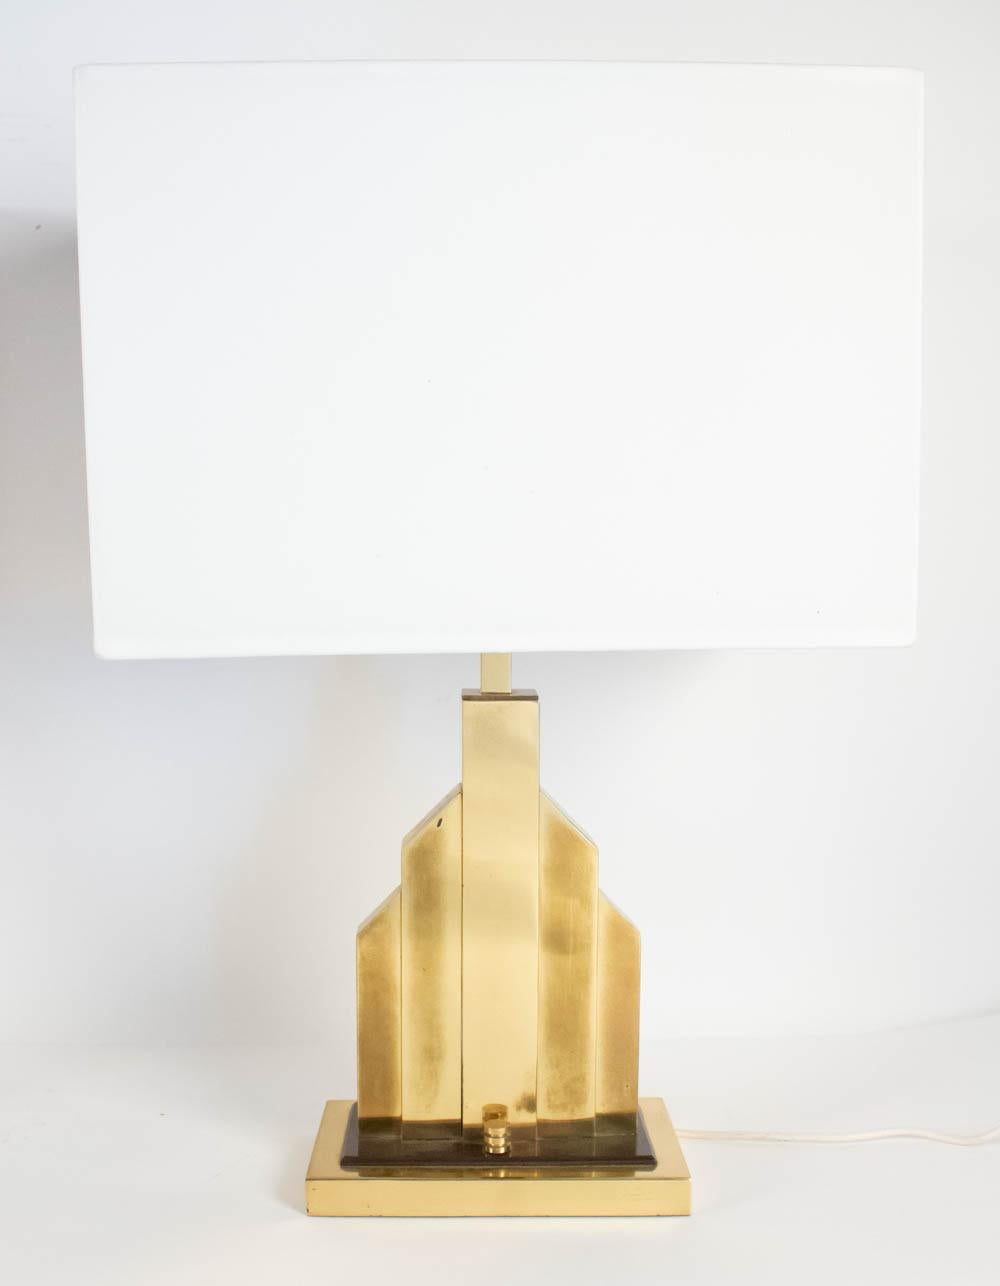 Unique rare pair of table lamps by Romeo Rega, gilded brass and bakelite, Italy, early 1970s.
There are several similar models of this pair, yet, the base of this pair is made of brass with a plate of black bakelite and original dimmer, which means